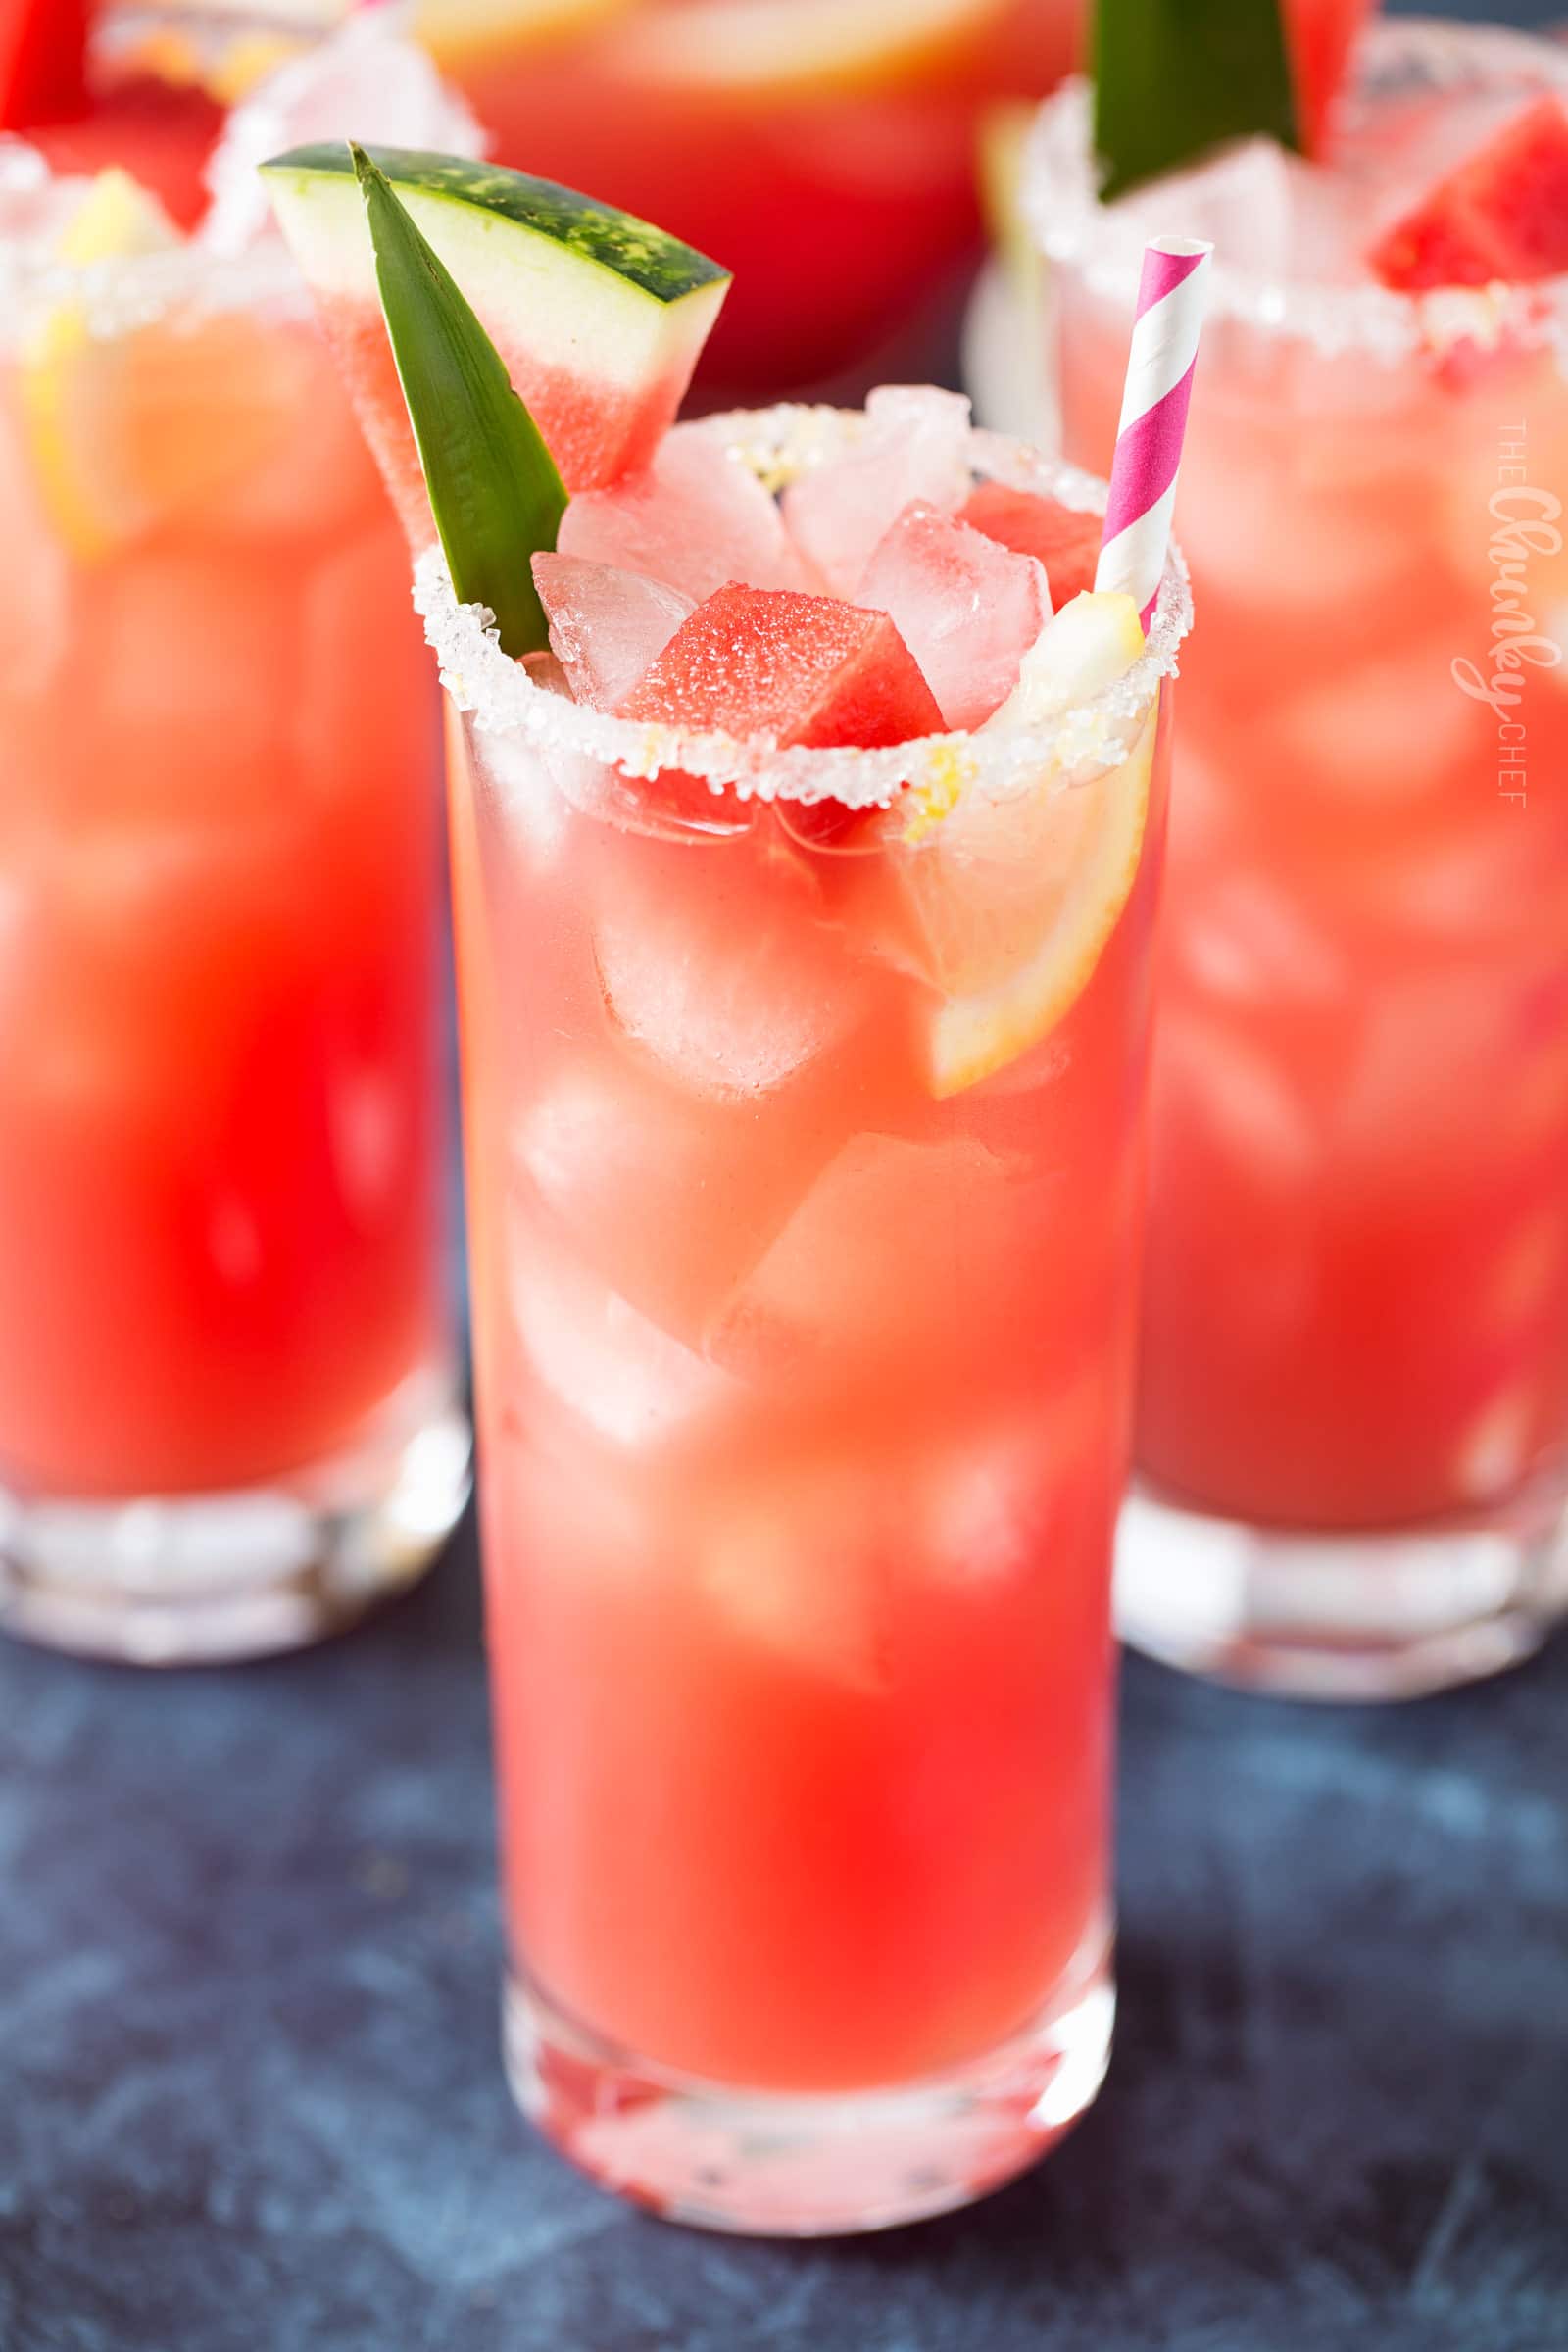 Summer Watermelon Lemonade | Sipping on this refreshing watermelon and pineapple lemonade is like taking a drink of pure summer!  Easy to make, and you can add a bit of alcohol for an adults-only beverage! | http://thechunkychef.com